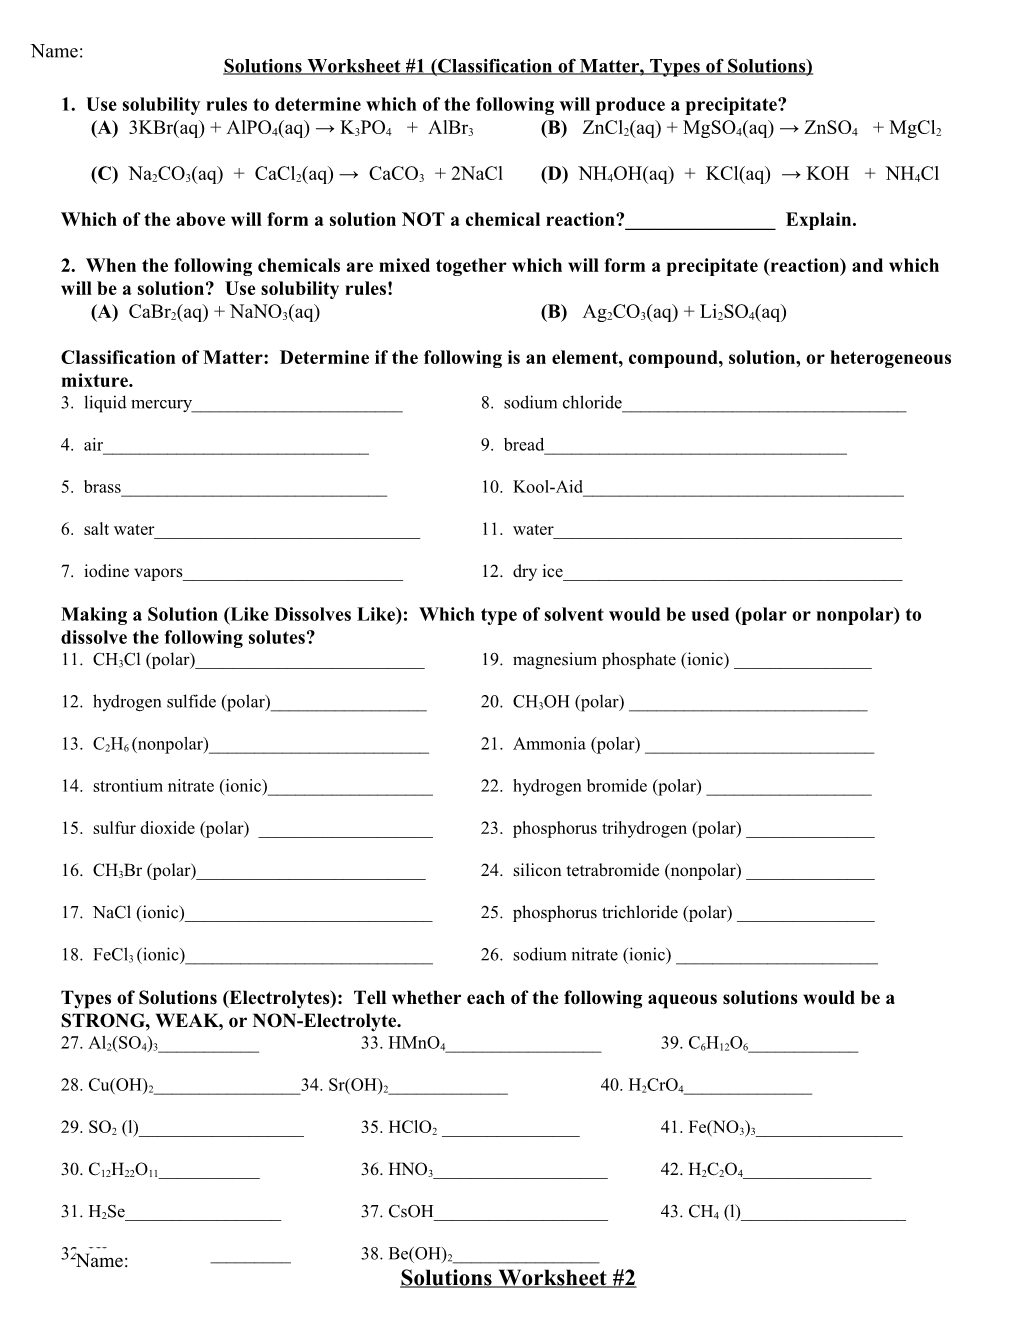 Solutions Worksheet #1 (Solutions, Electrolyte S, and Classification of Matter)